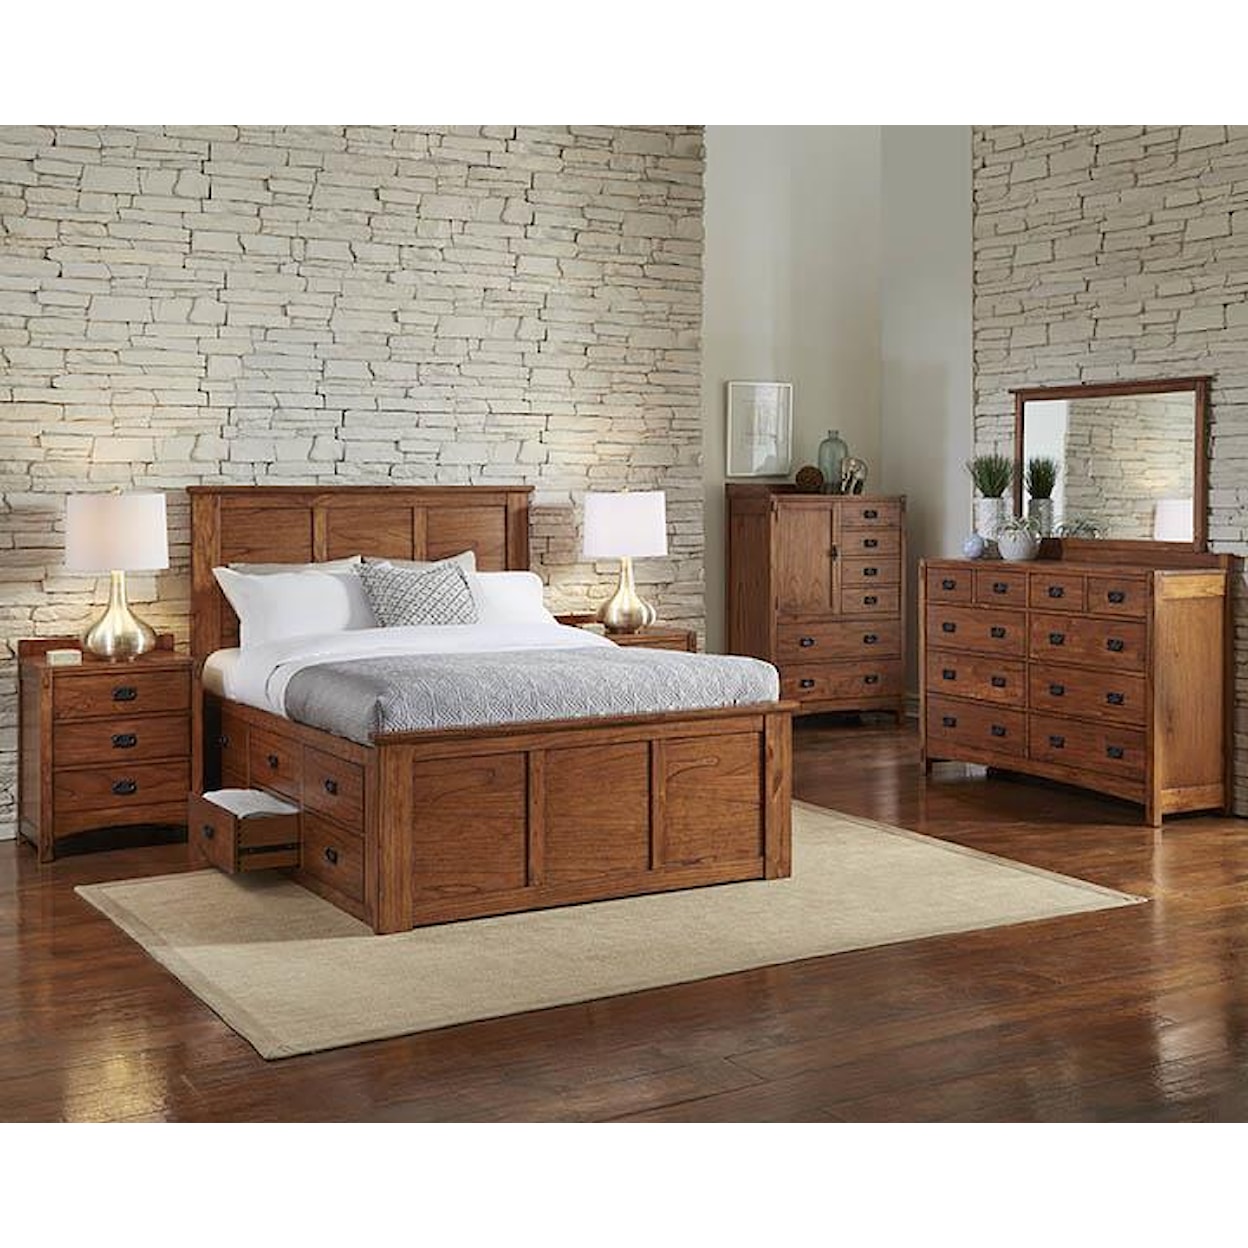 AAmerica Mission Hill Nightstand